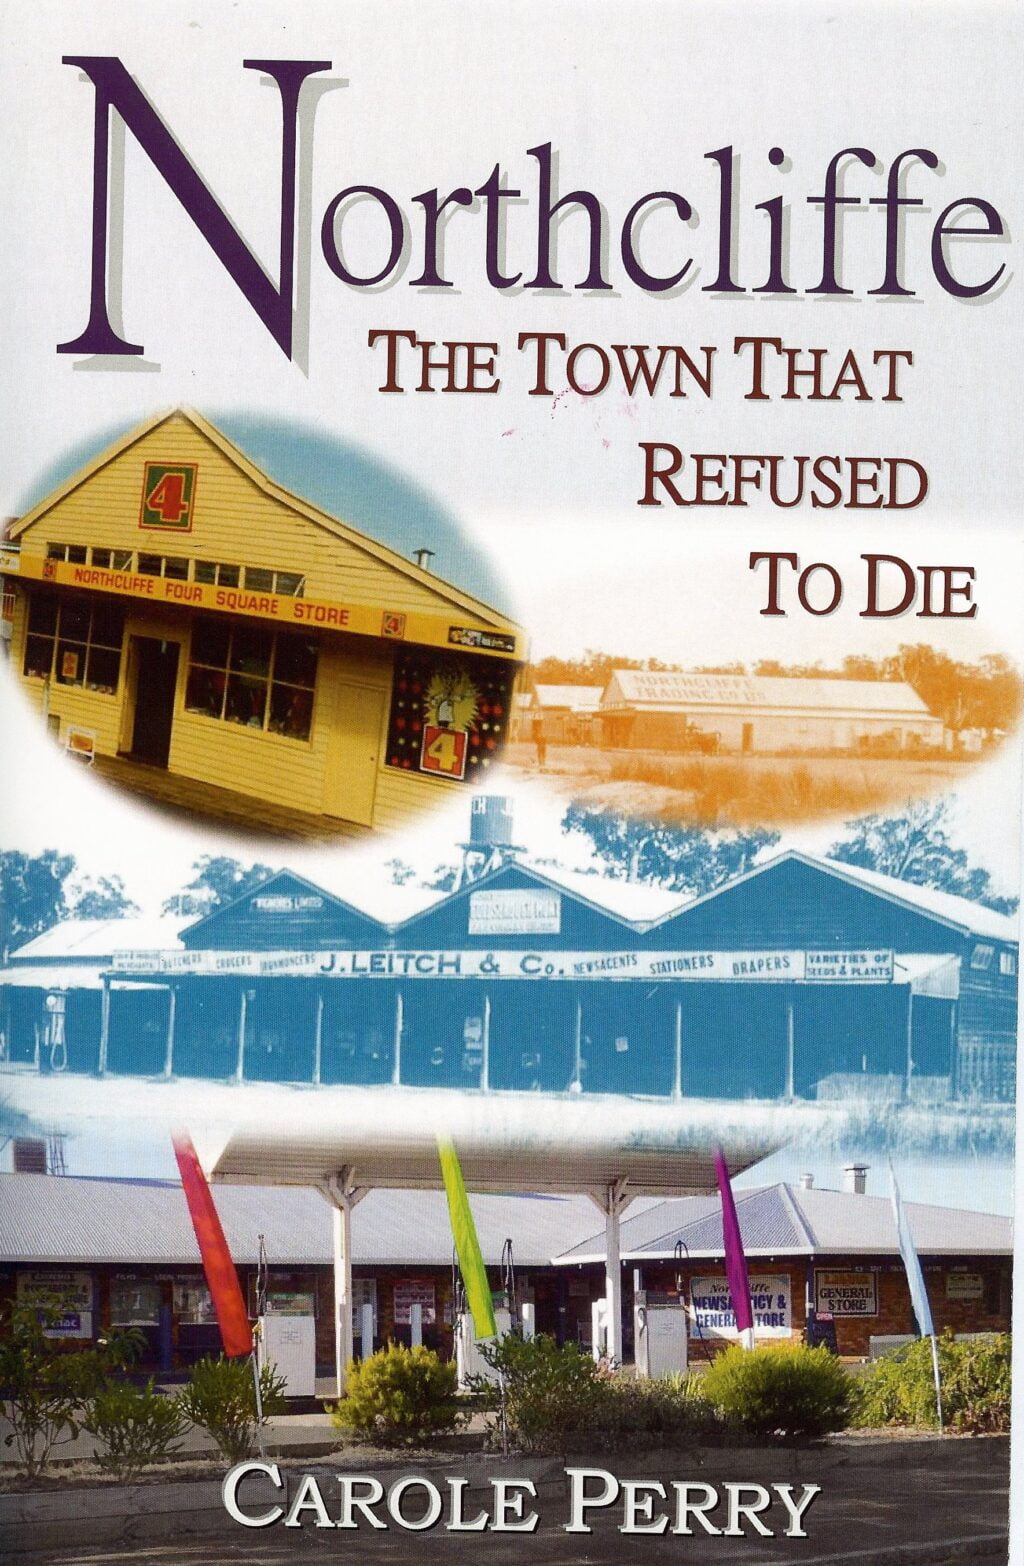 Northcliffe - The Town that Refused to Die